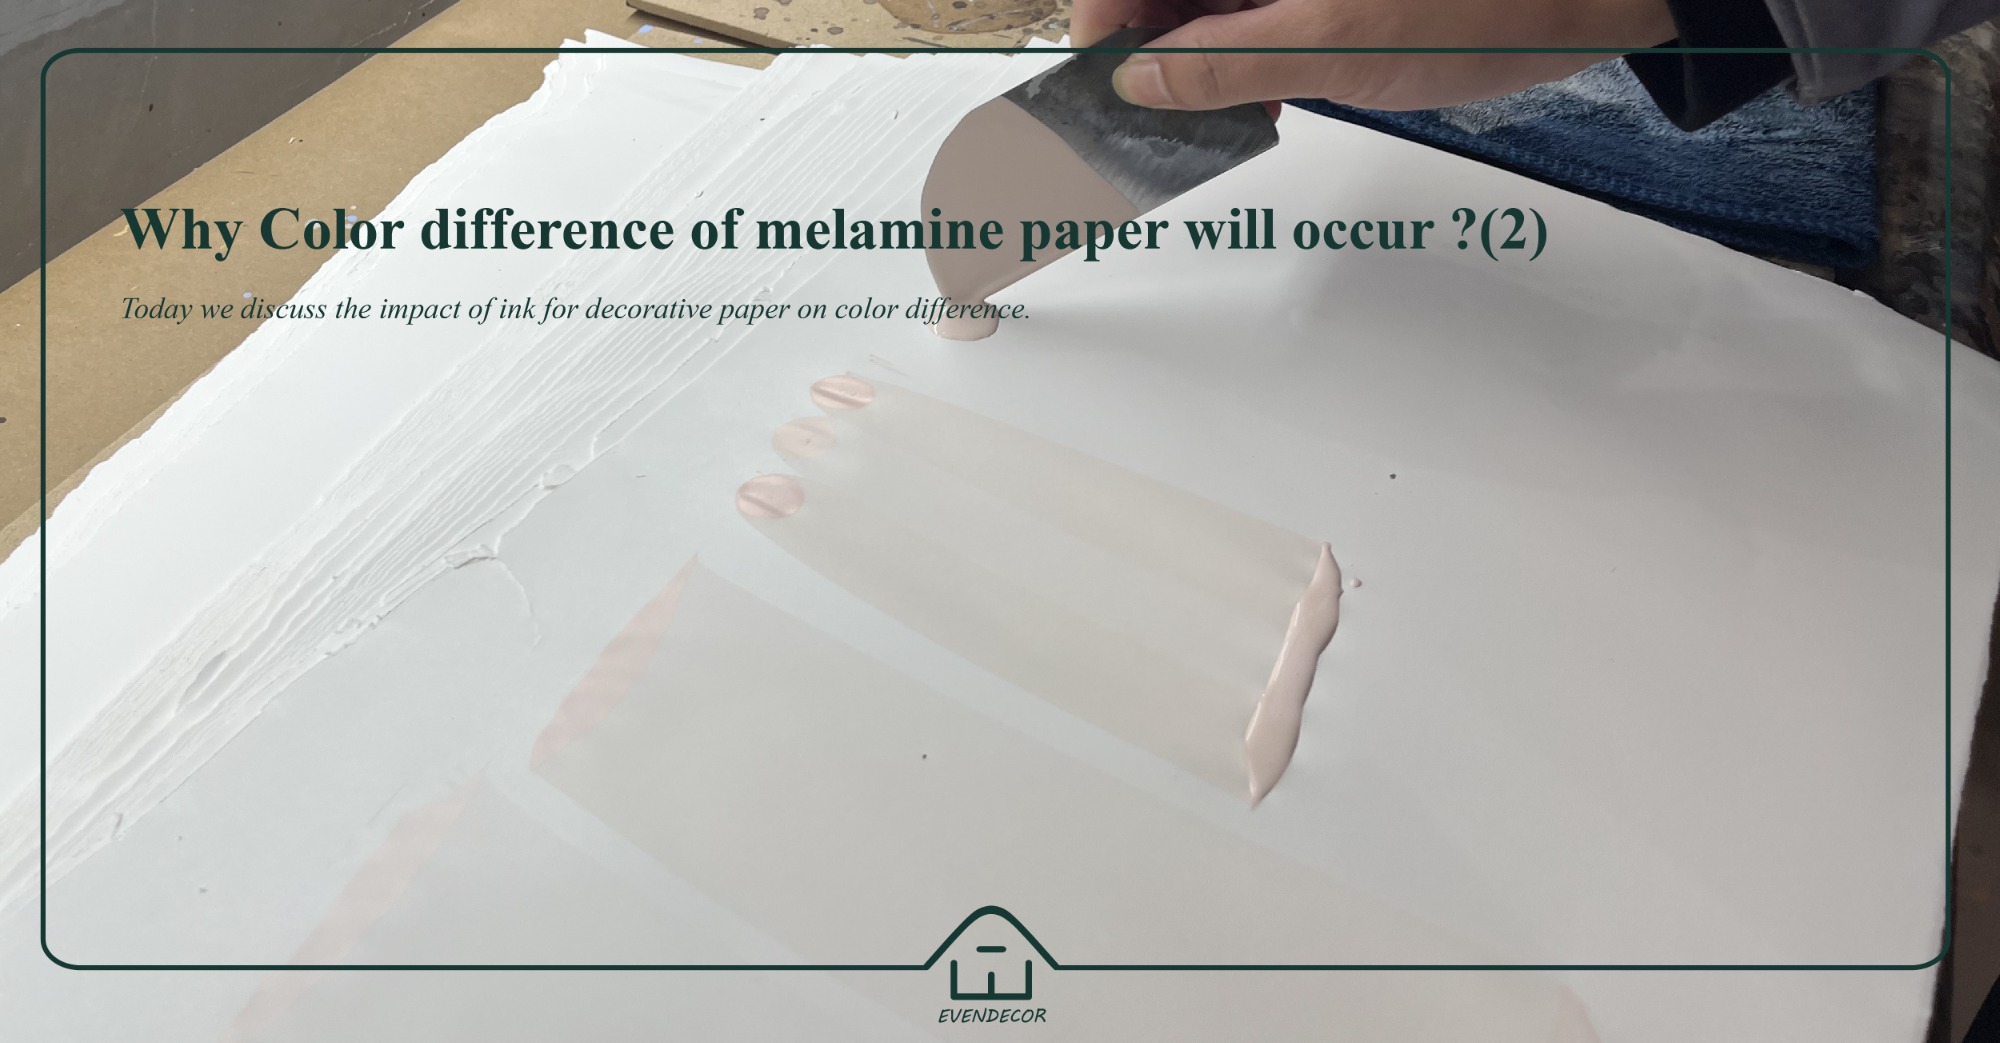 Why color difference of melamine paper will occur?(2)